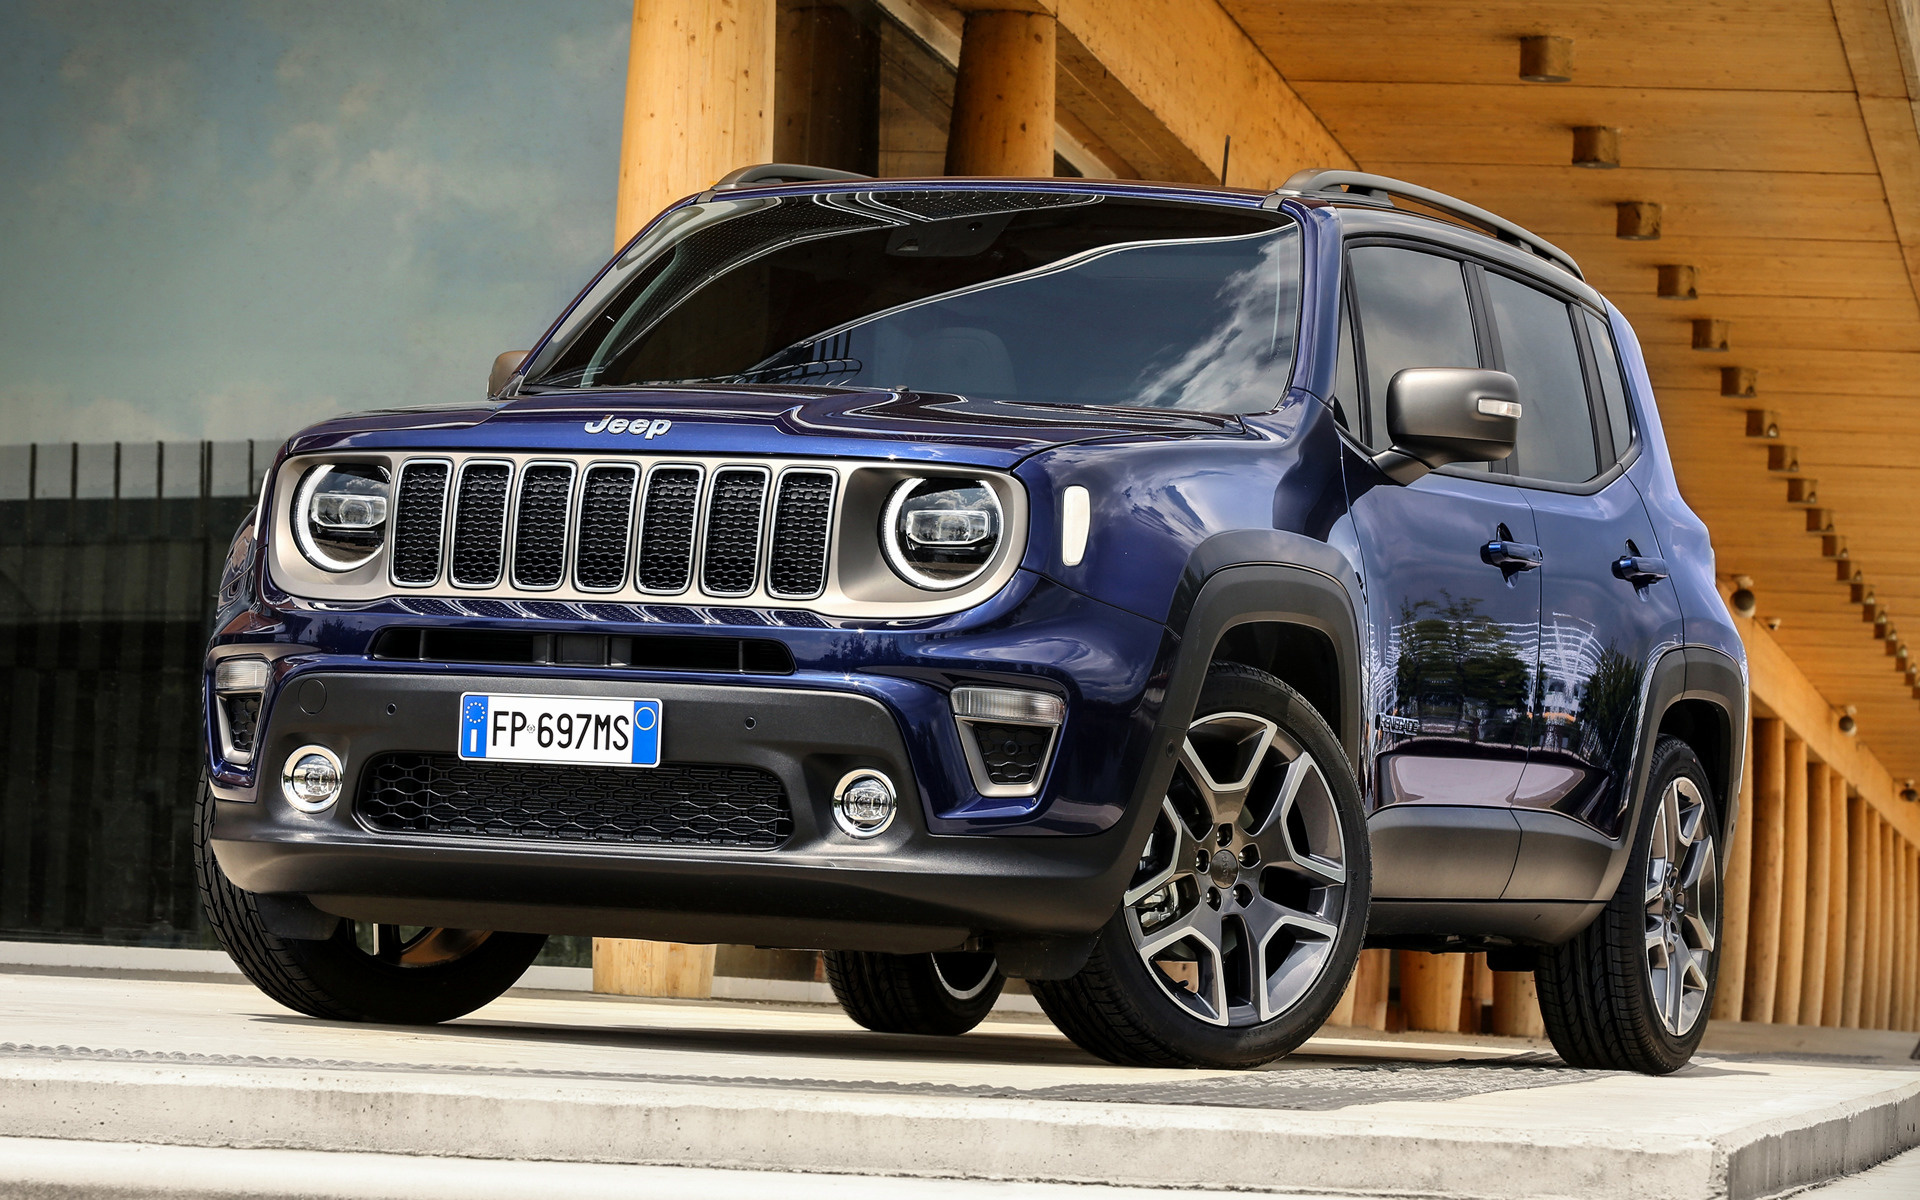 Jeep Renegade, Auto industry, HD wallpapers, Wallpaper collection, 1920x1200 HD Desktop